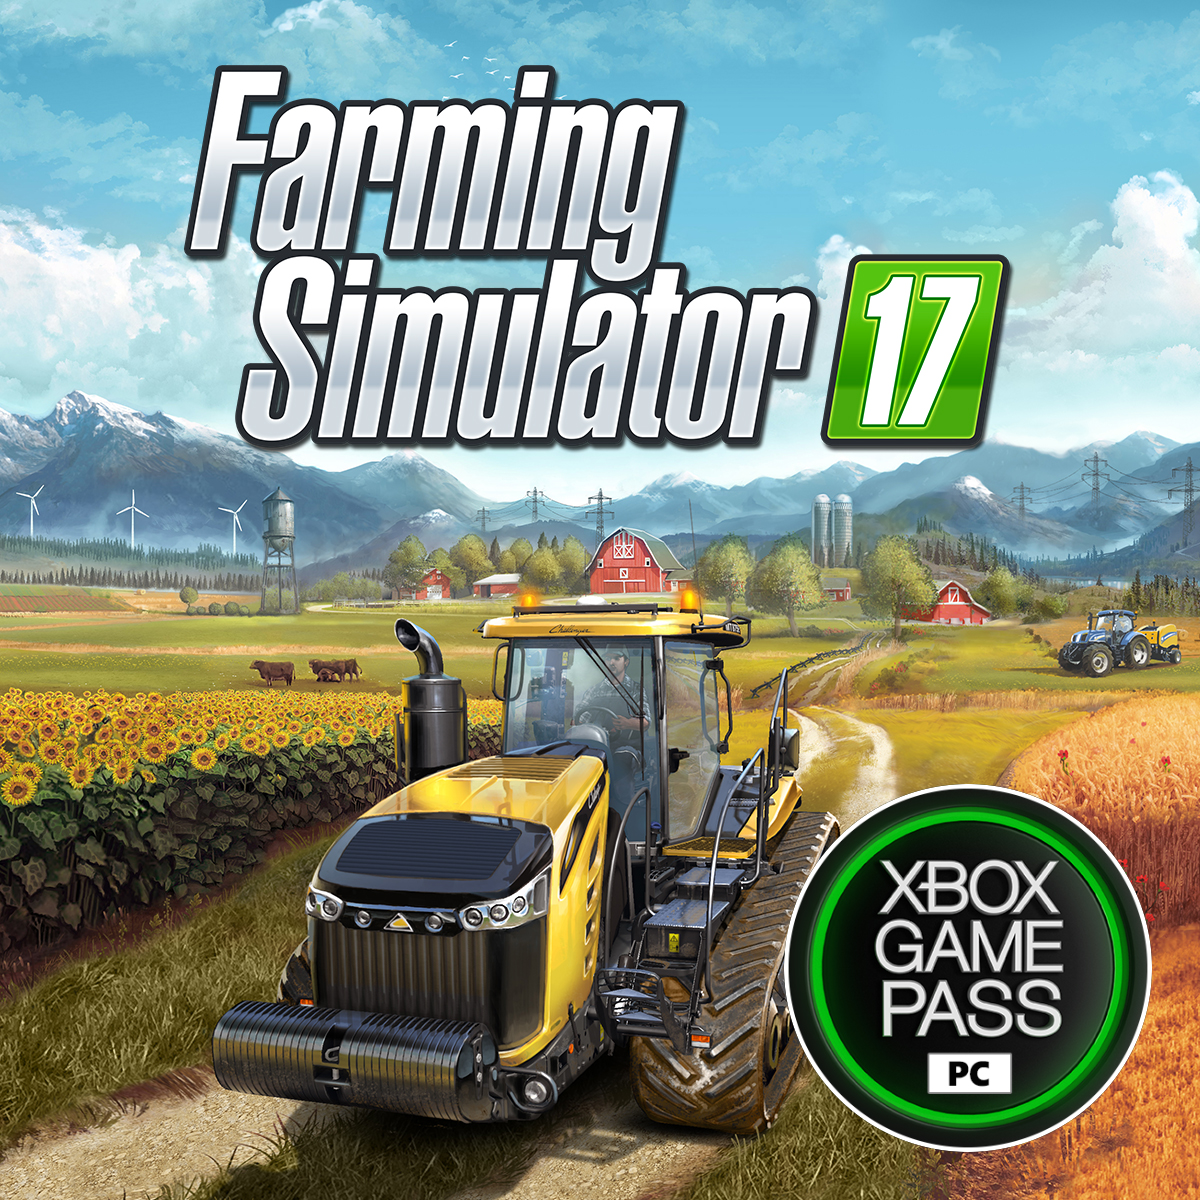 verlies uzelf Profetie Hoe dan ook Farming Simulator on Twitter: "Farming Simulator 17 lands on  @XboxGamePassPC today! Multiplayer, PC cross-play, achievements, all DLCs,  mod support… everything is there! https://t.co/oWQ1hwpguP" / Twitter